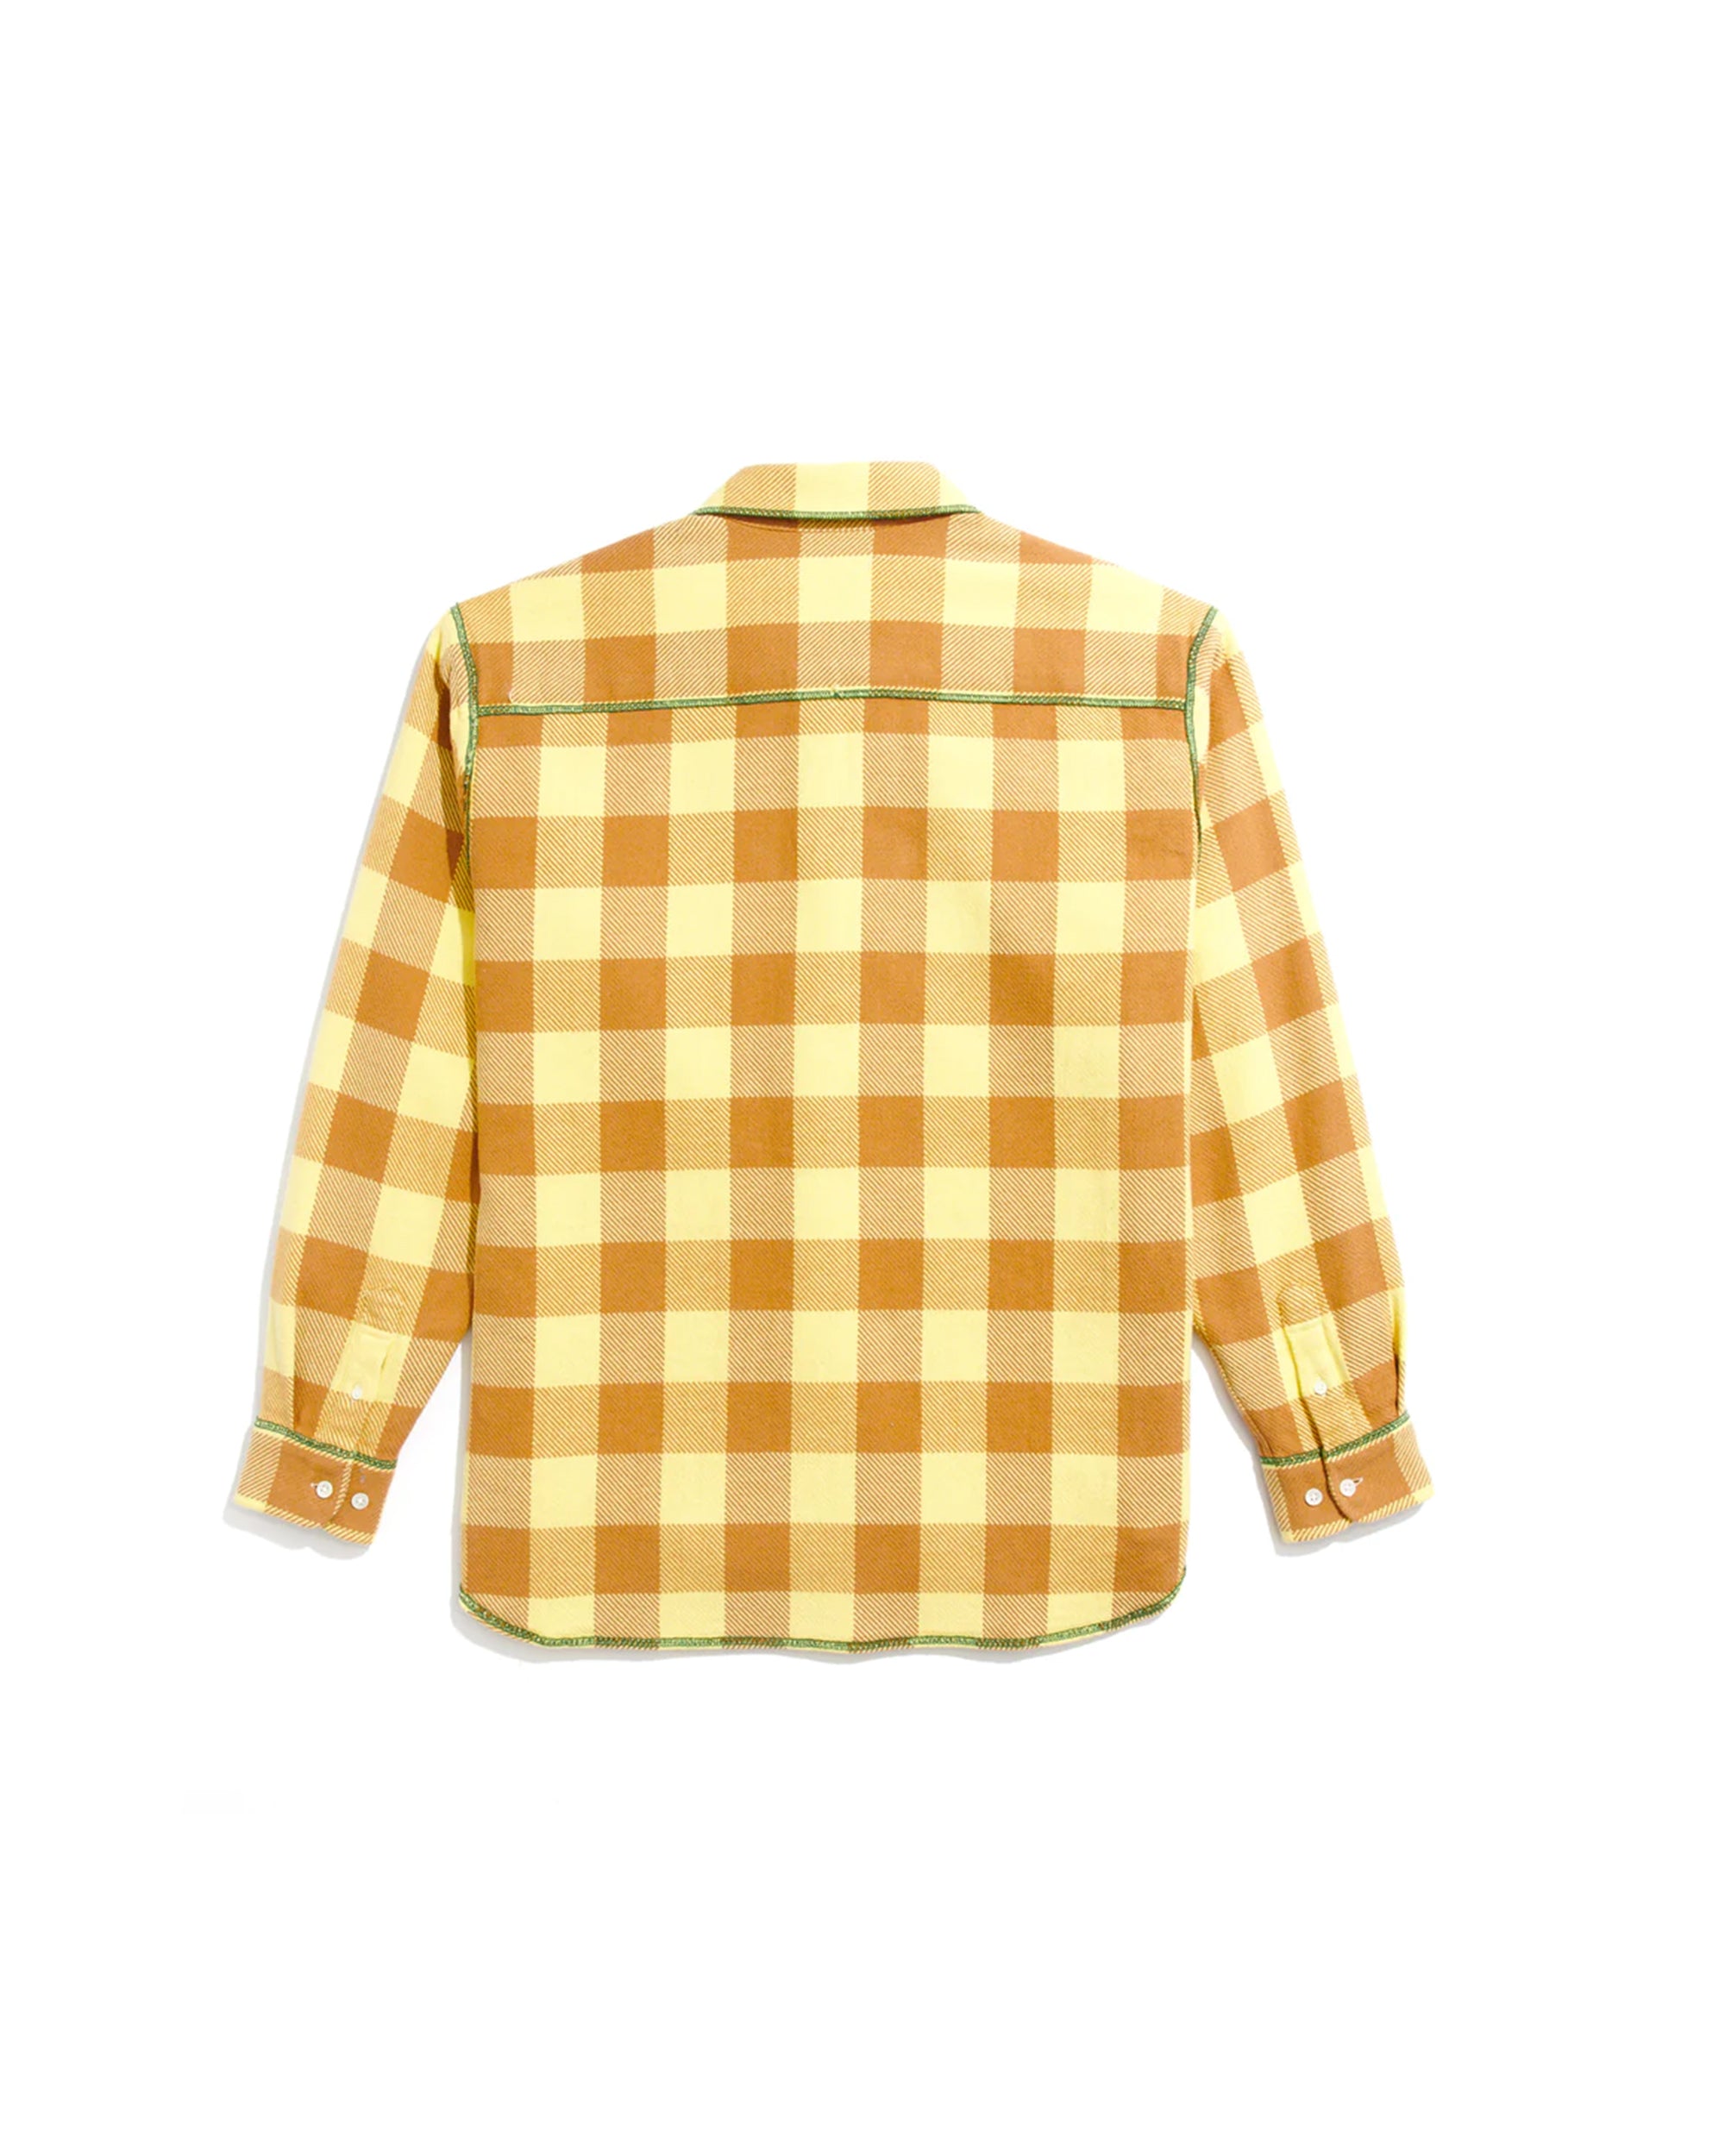 Contrast Stitch Flannel - Yellow / Brown